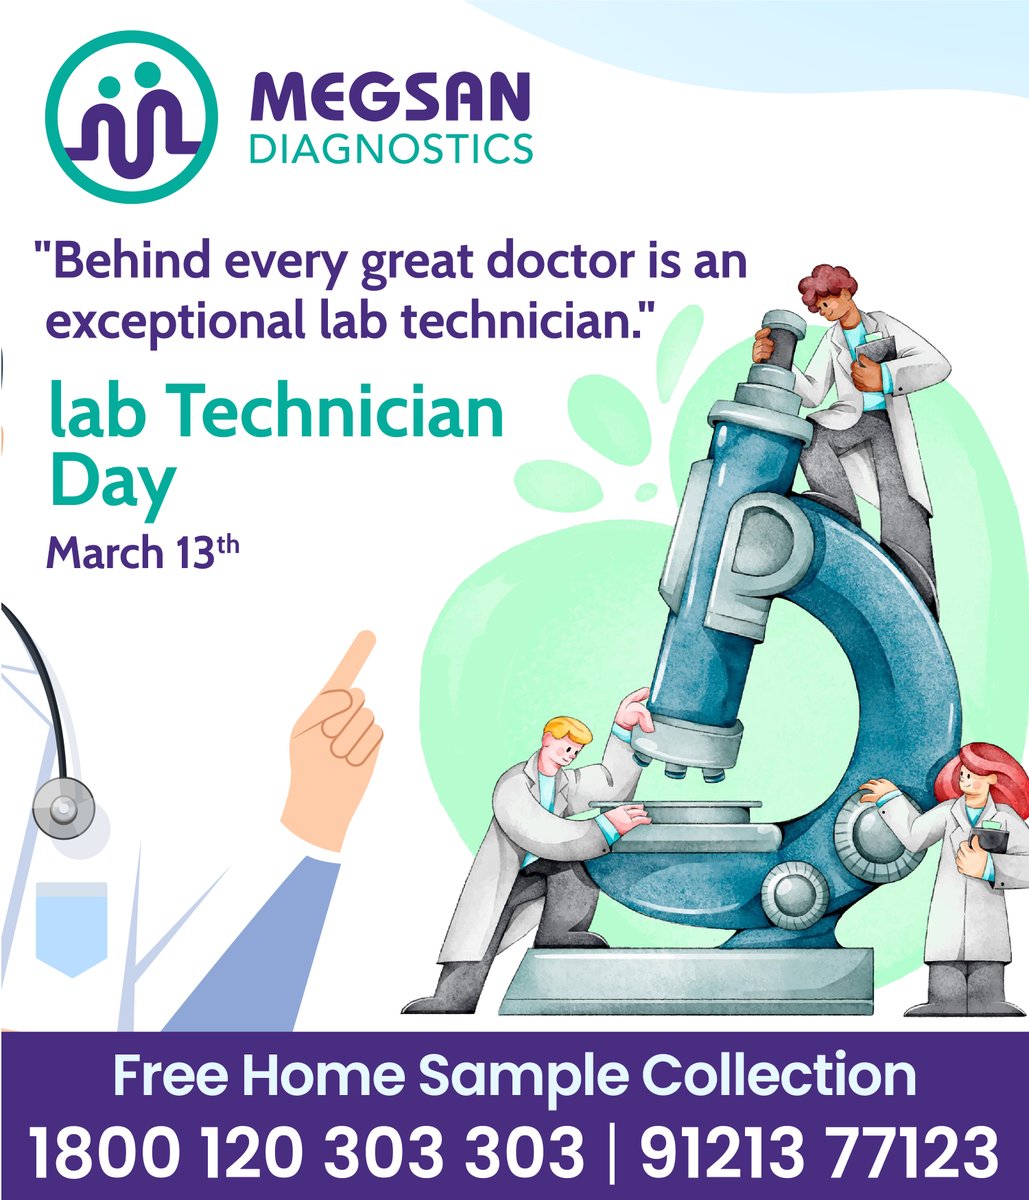 'Behind every great doctor is an exceptional lab technician.'#labtechnician #labtechnicianday